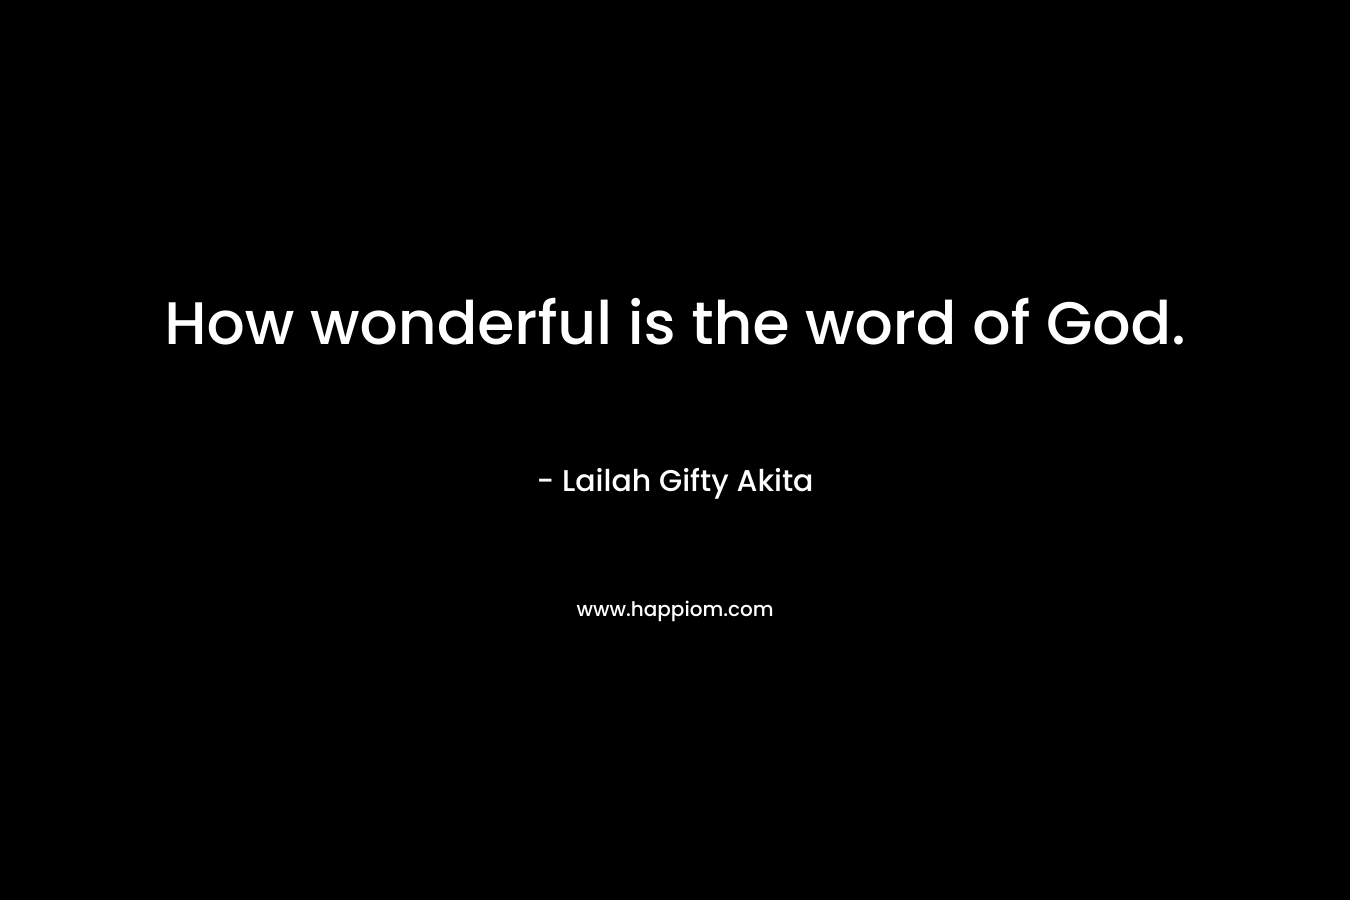 How wonderful is the word of God.